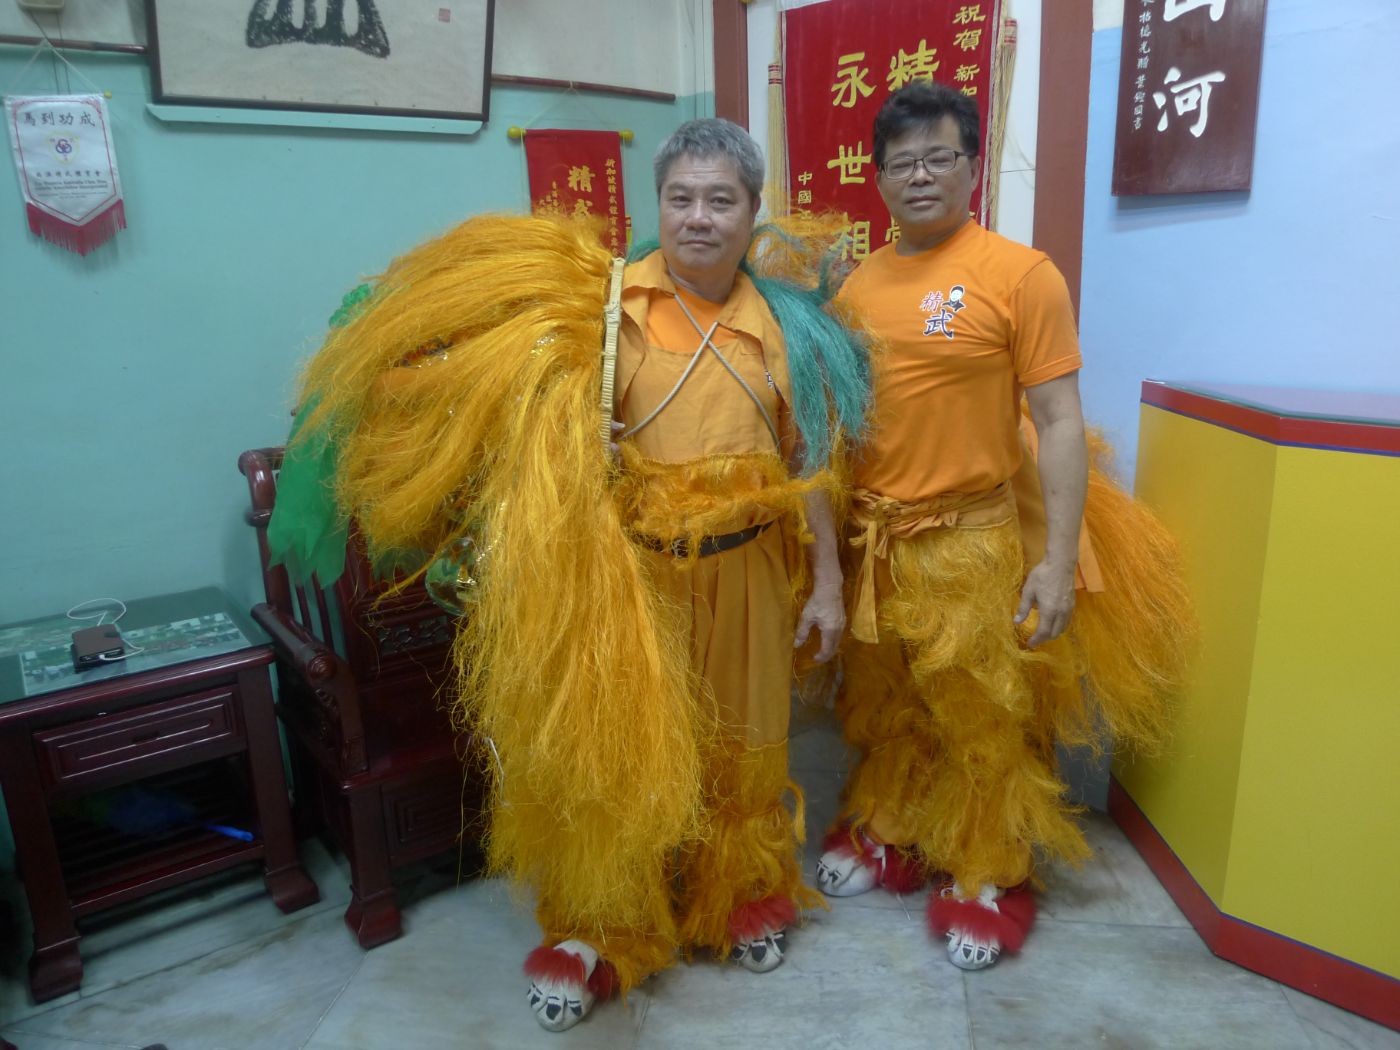 Mr Lim Soin Khoon (left) from Singapore Chin Woo Athletic Association with a troupe member in their lion dance costumes.  